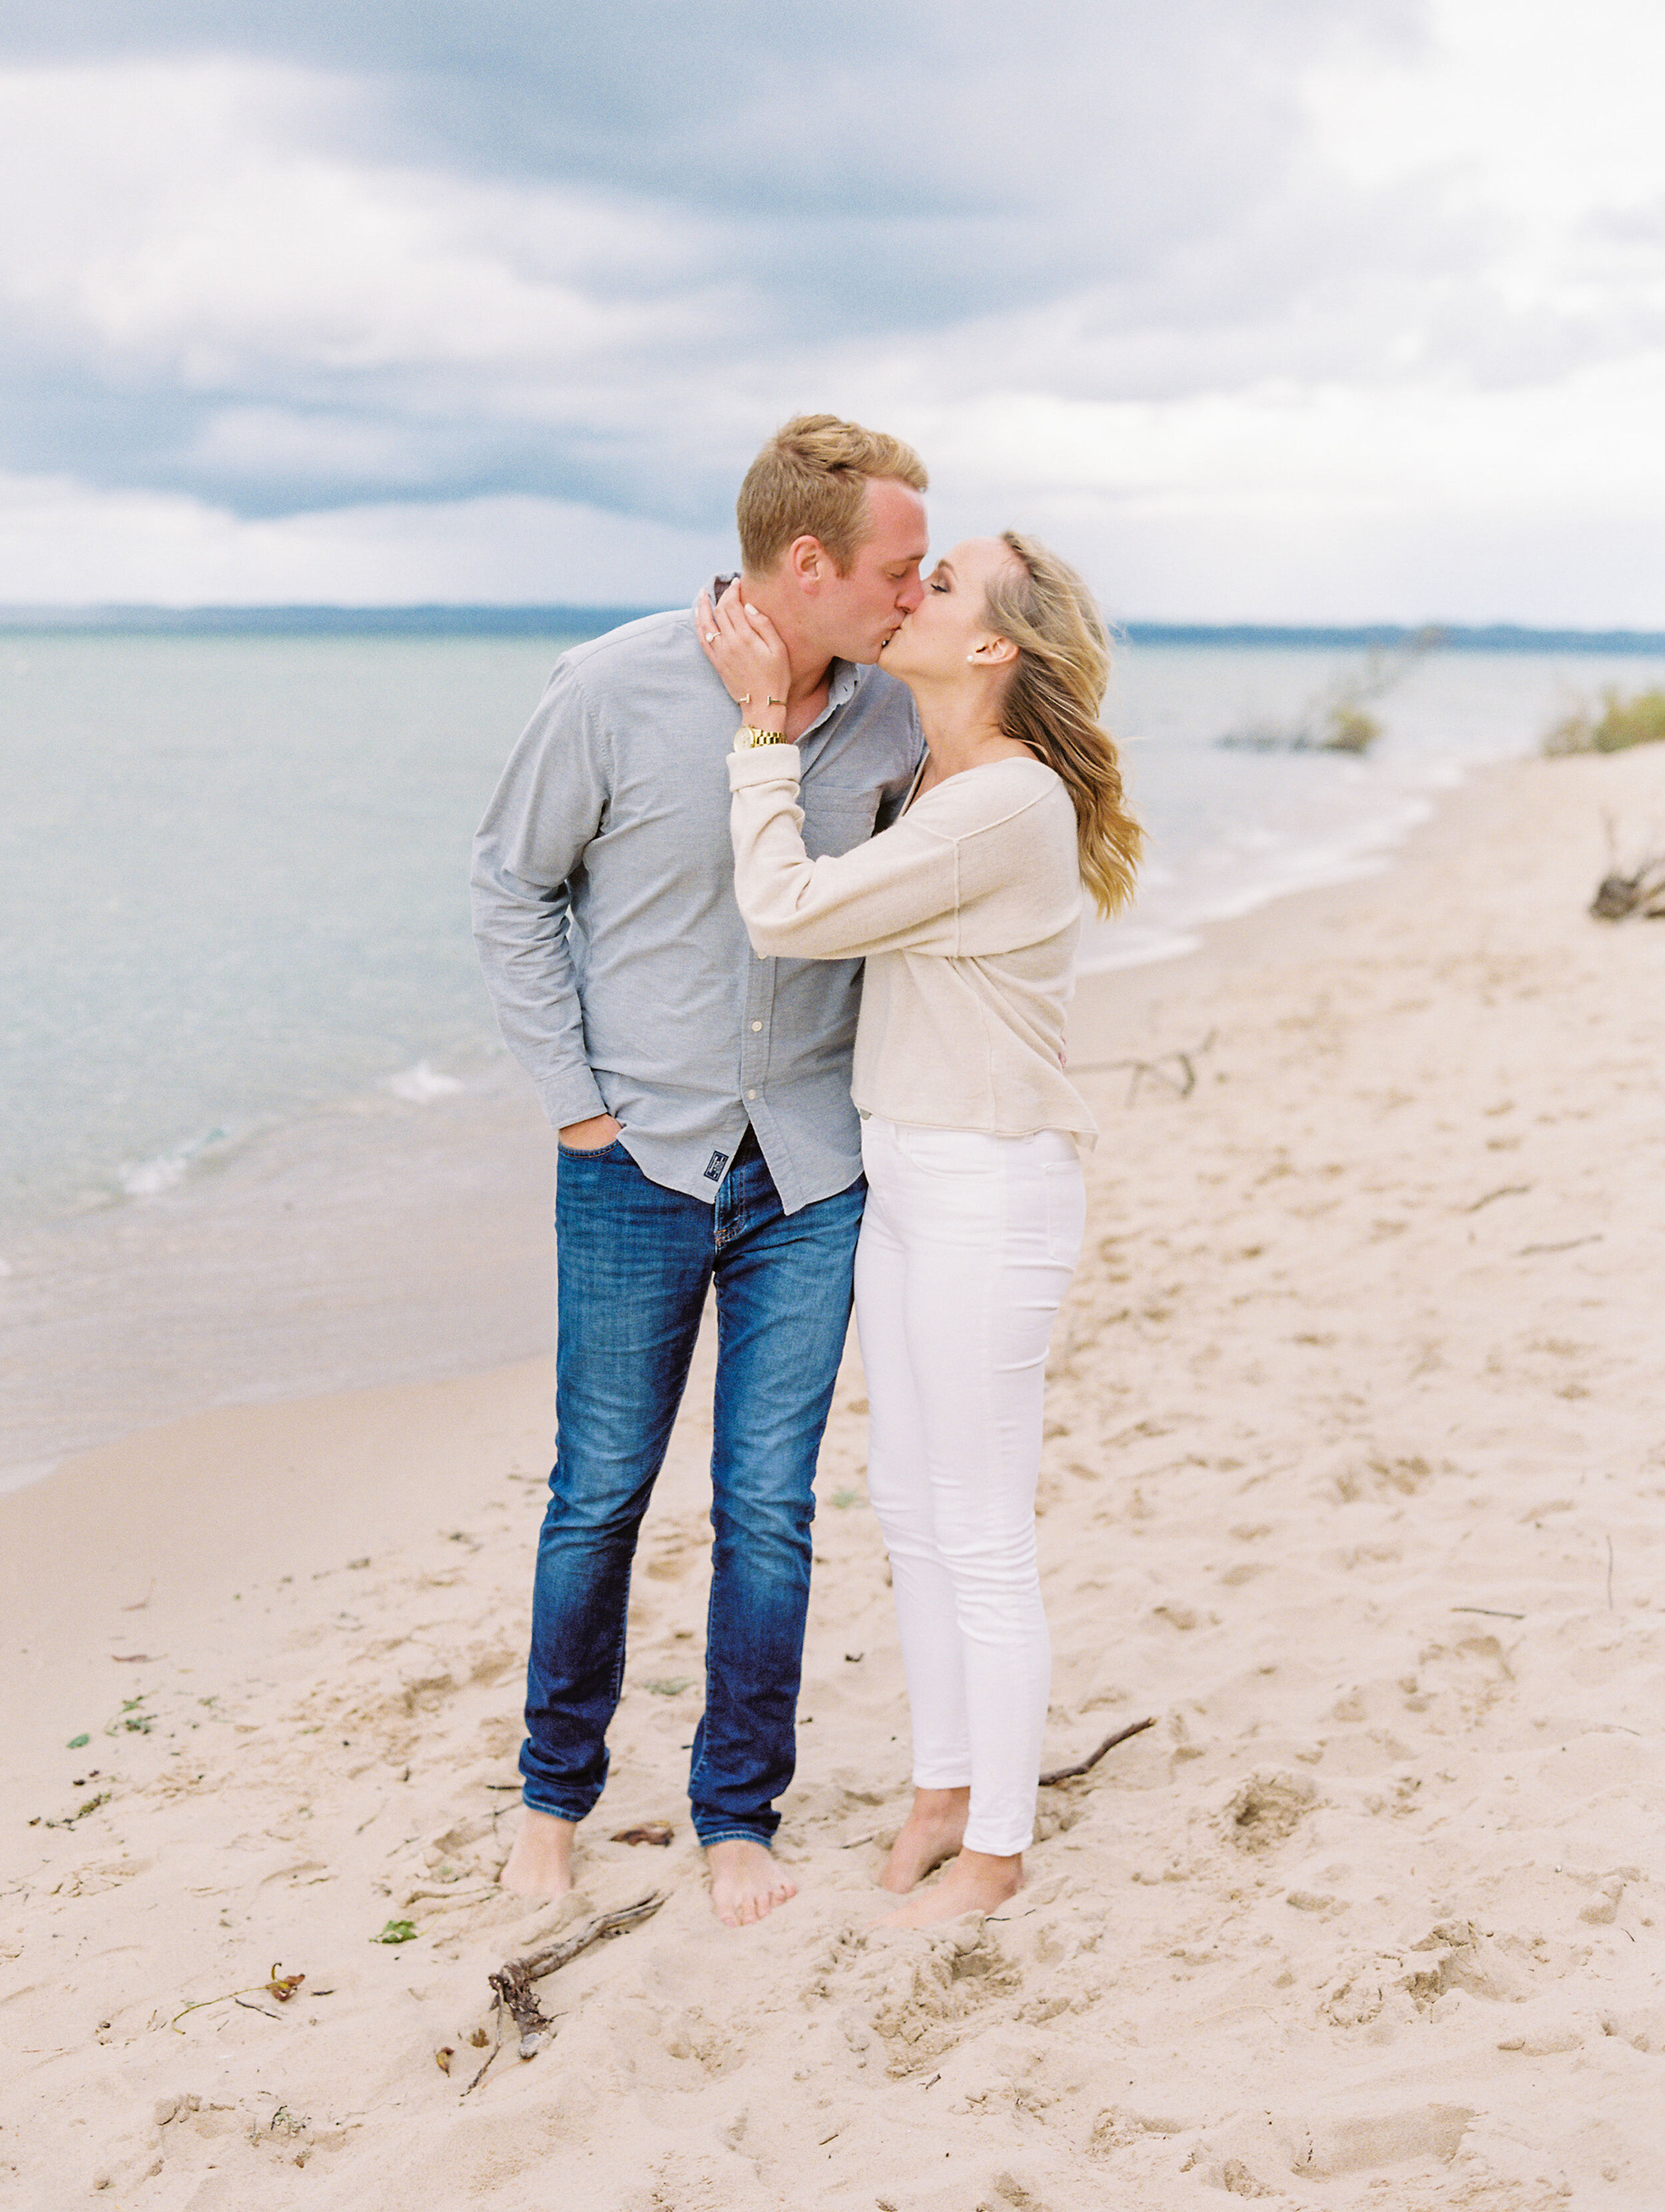 Molly+Connor+Engaged-121.jpg